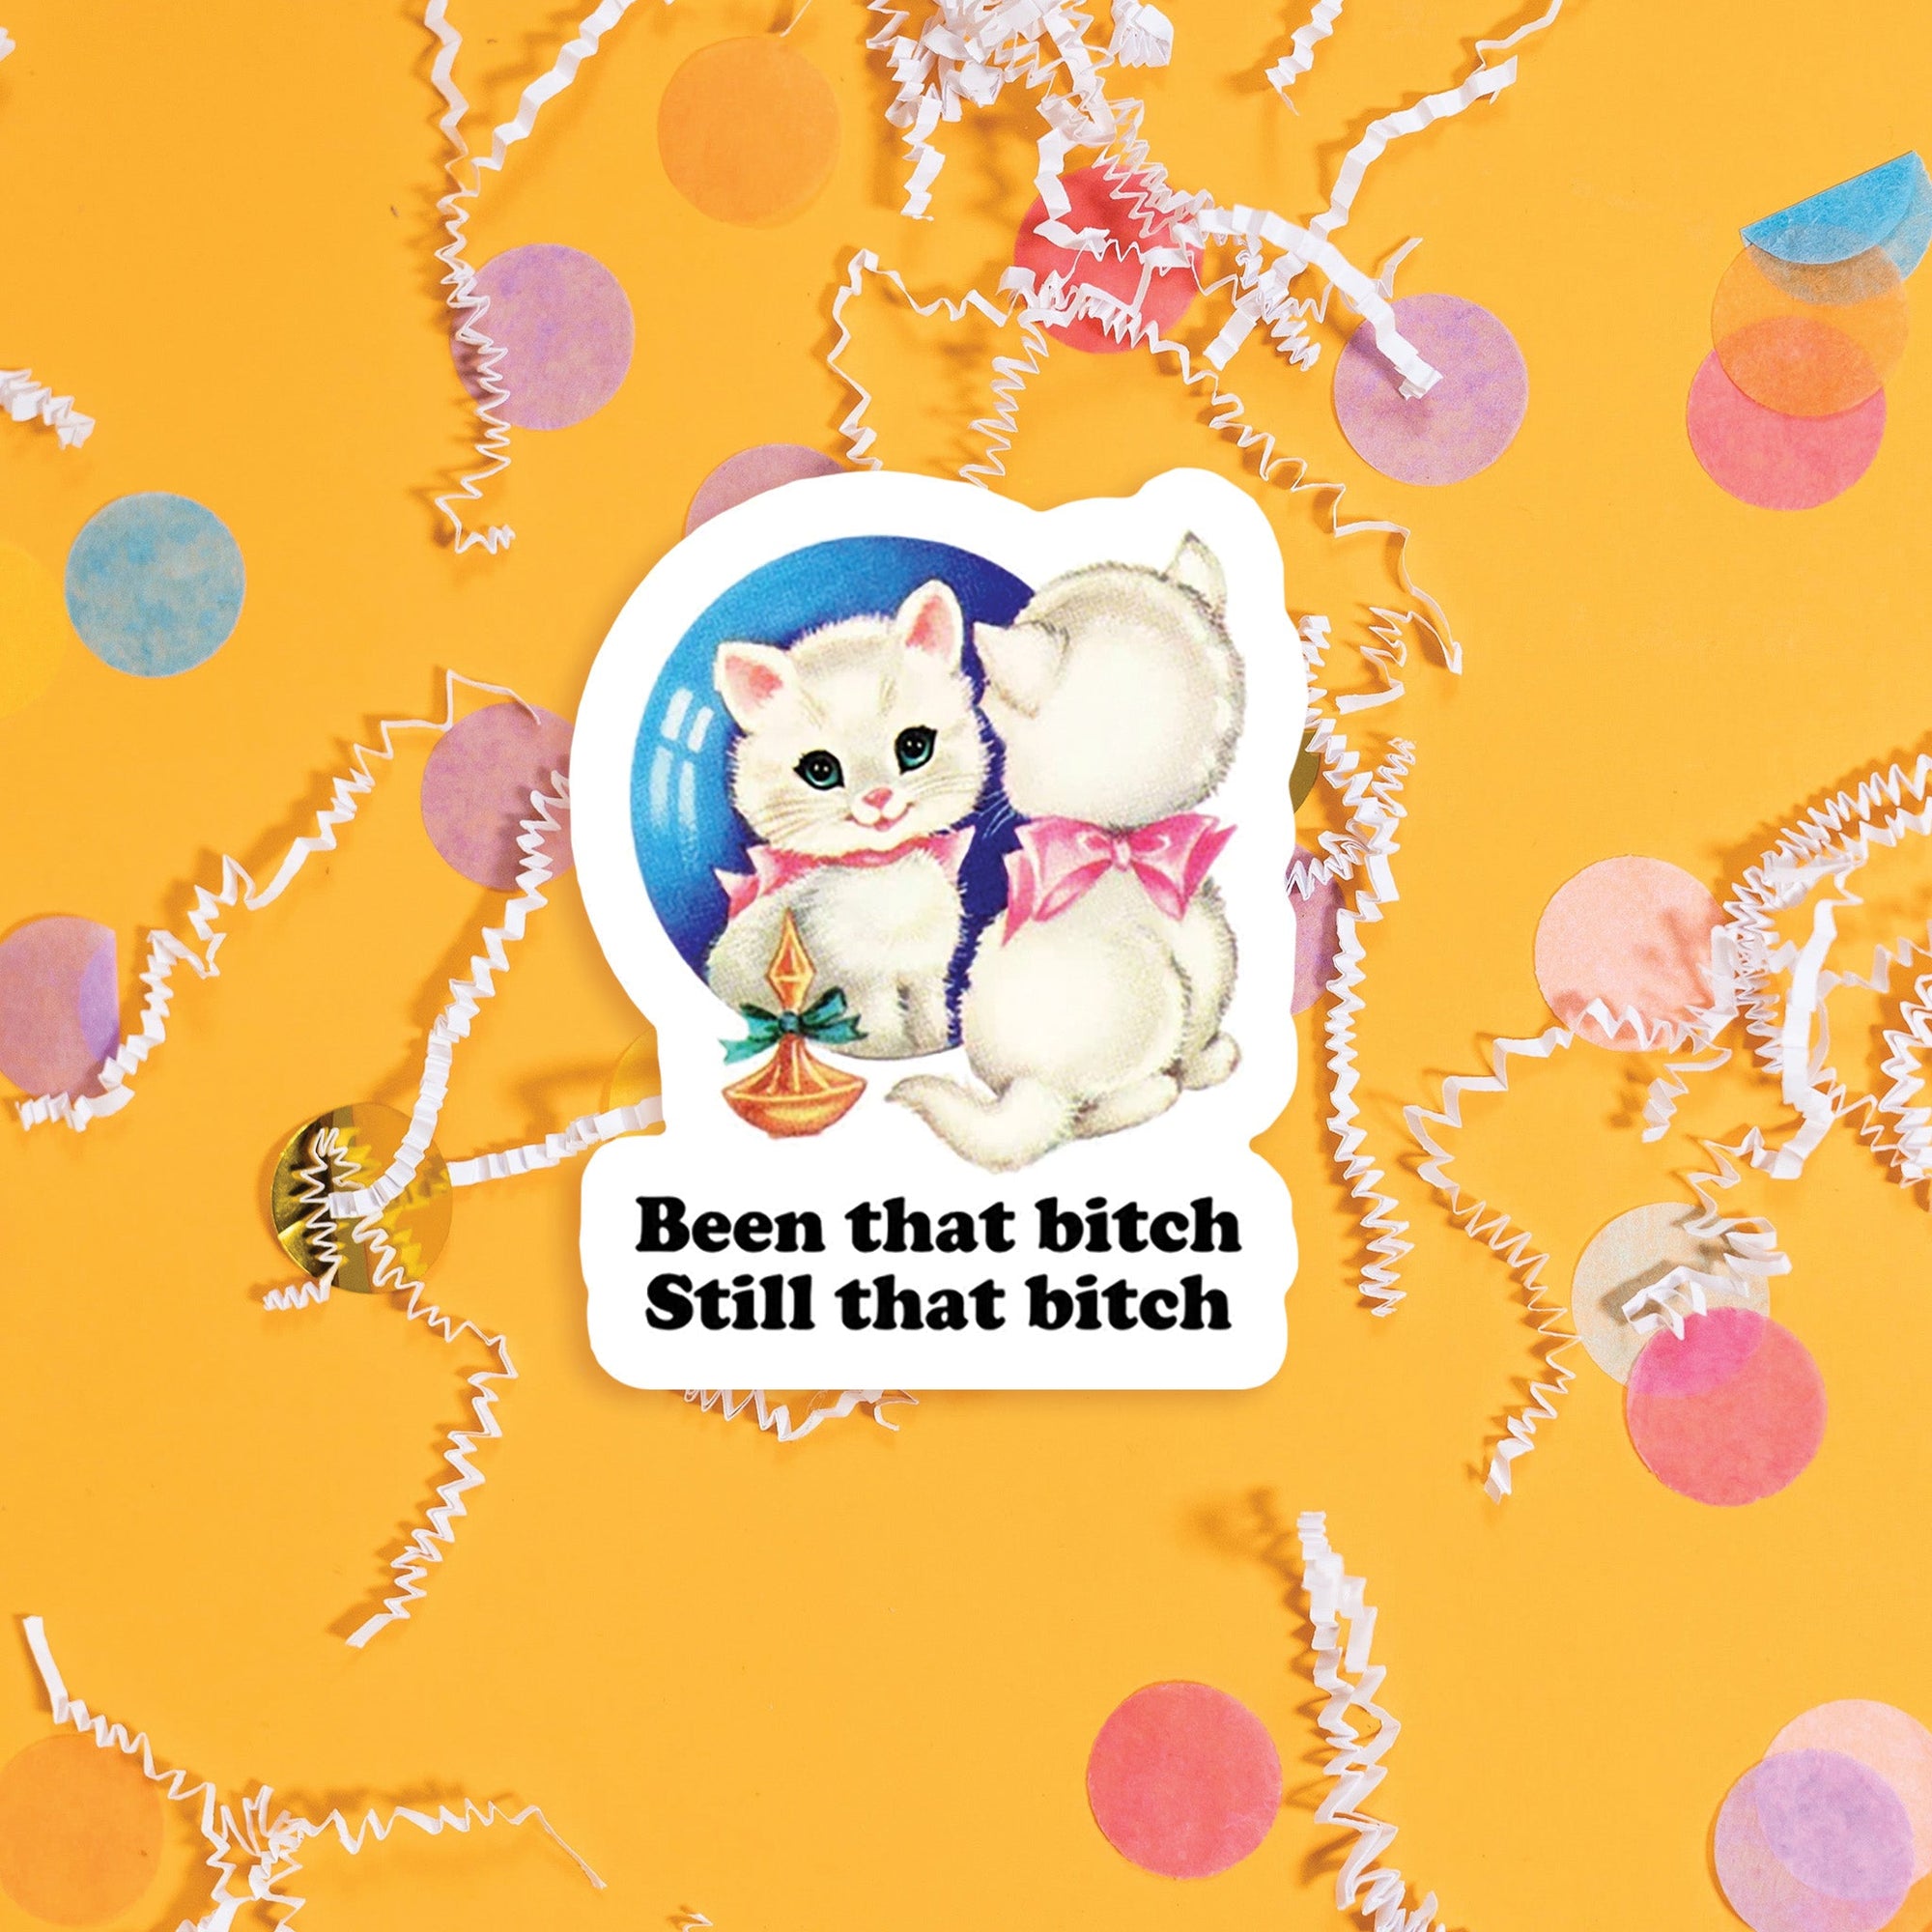 On a sunny mustard background sits a sticker with colorful confetti and white crinkle scattered around. This vintage sticker has an illustration of a darling white kitten staring at itself in a mirror. It says "Been that bitch Still that bitch" in black, thick serif font. Approximately 3".